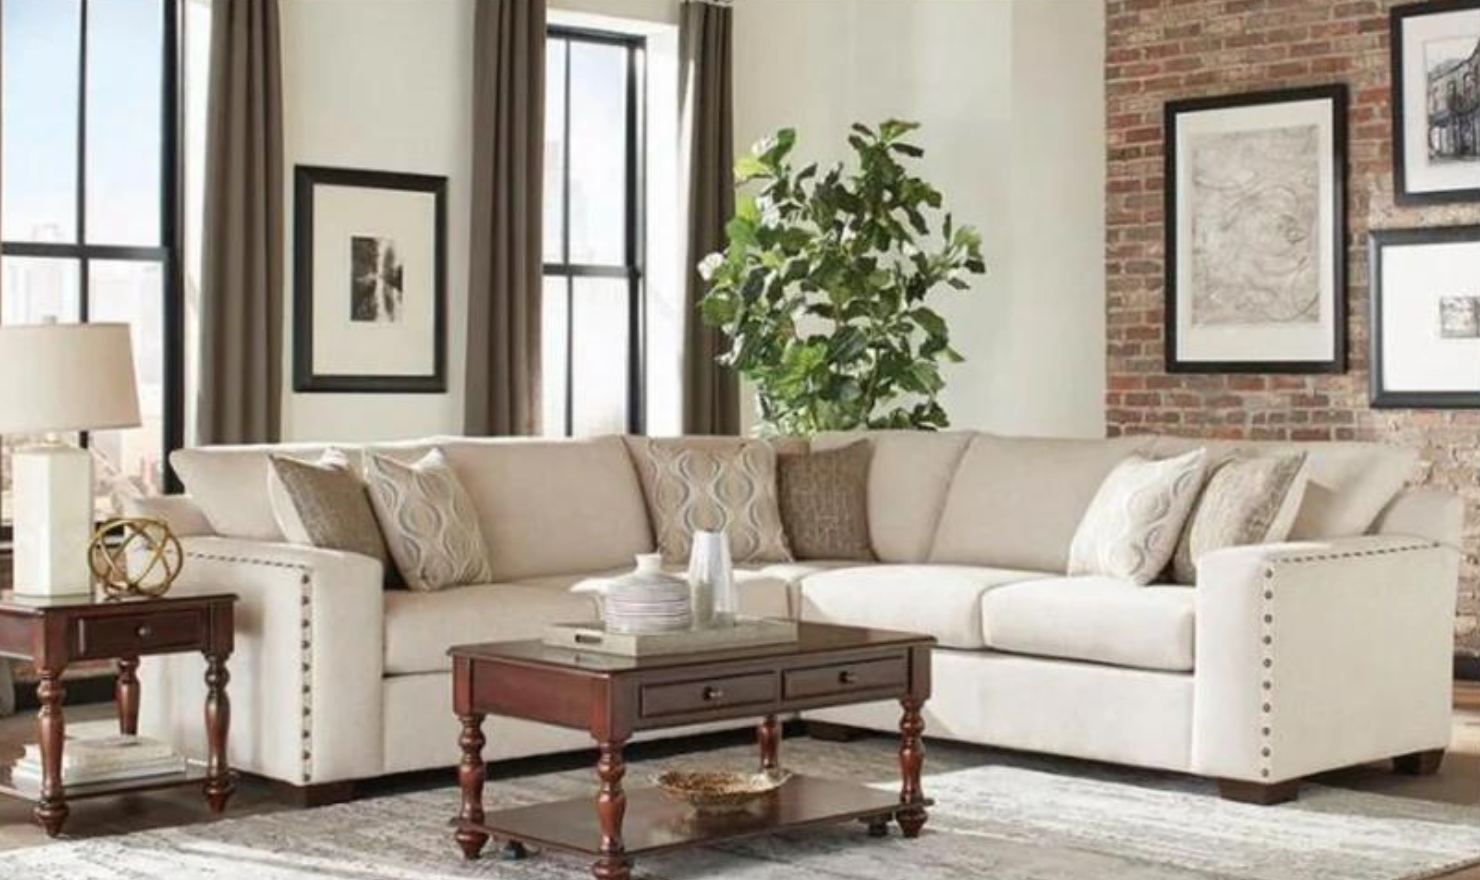 Consider A Sectional Sofa With A Low Back